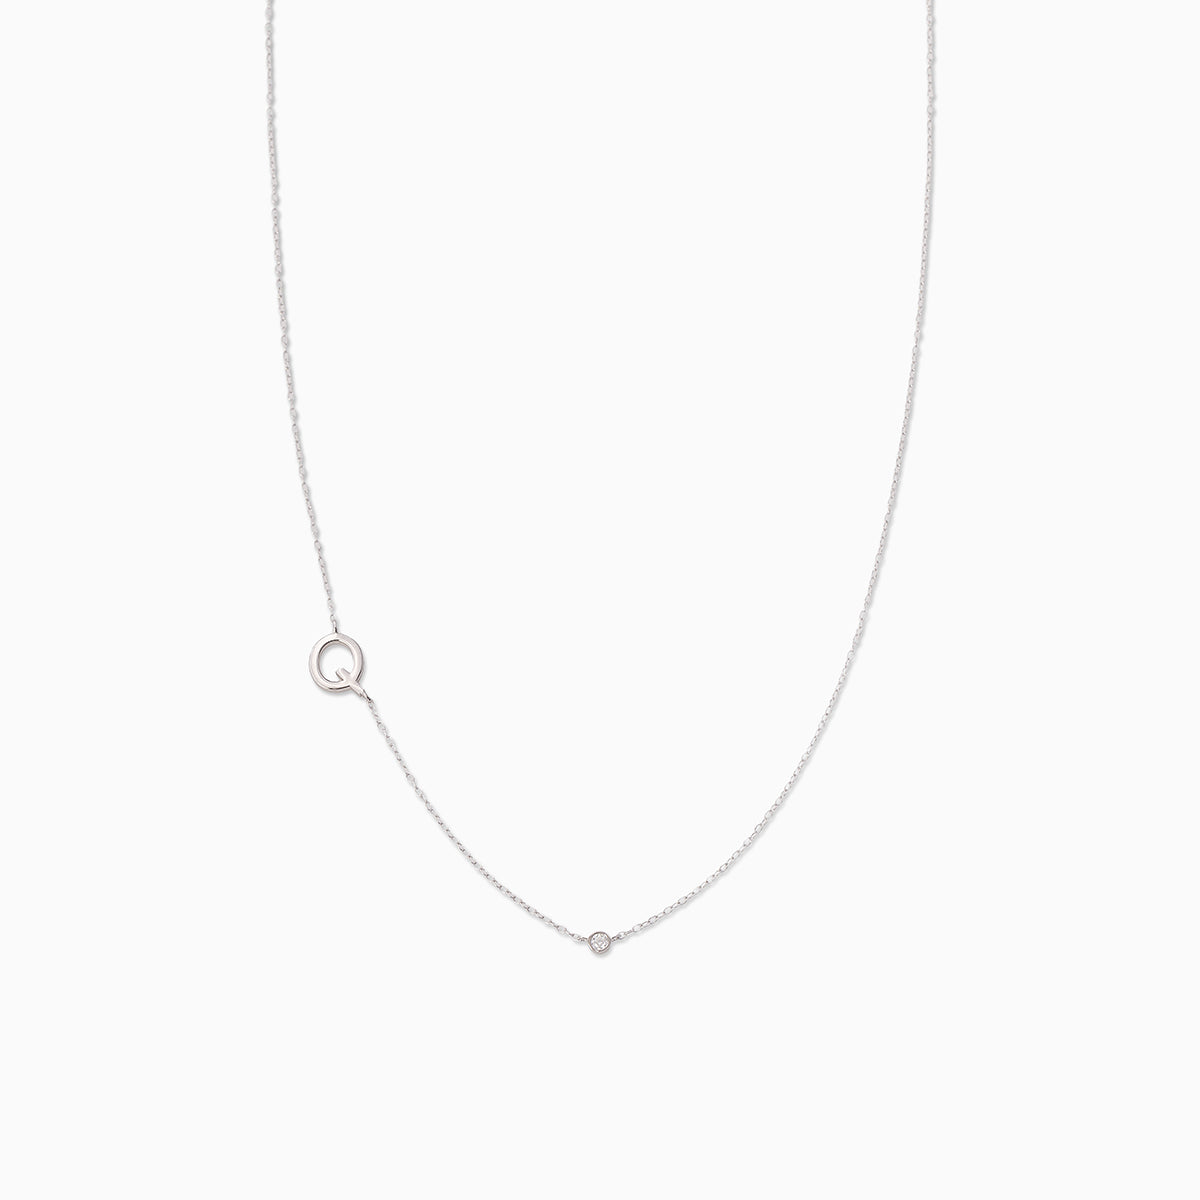 Personalized Touch Necklace | Sterling Silver Q | Product Image | Uncommon James